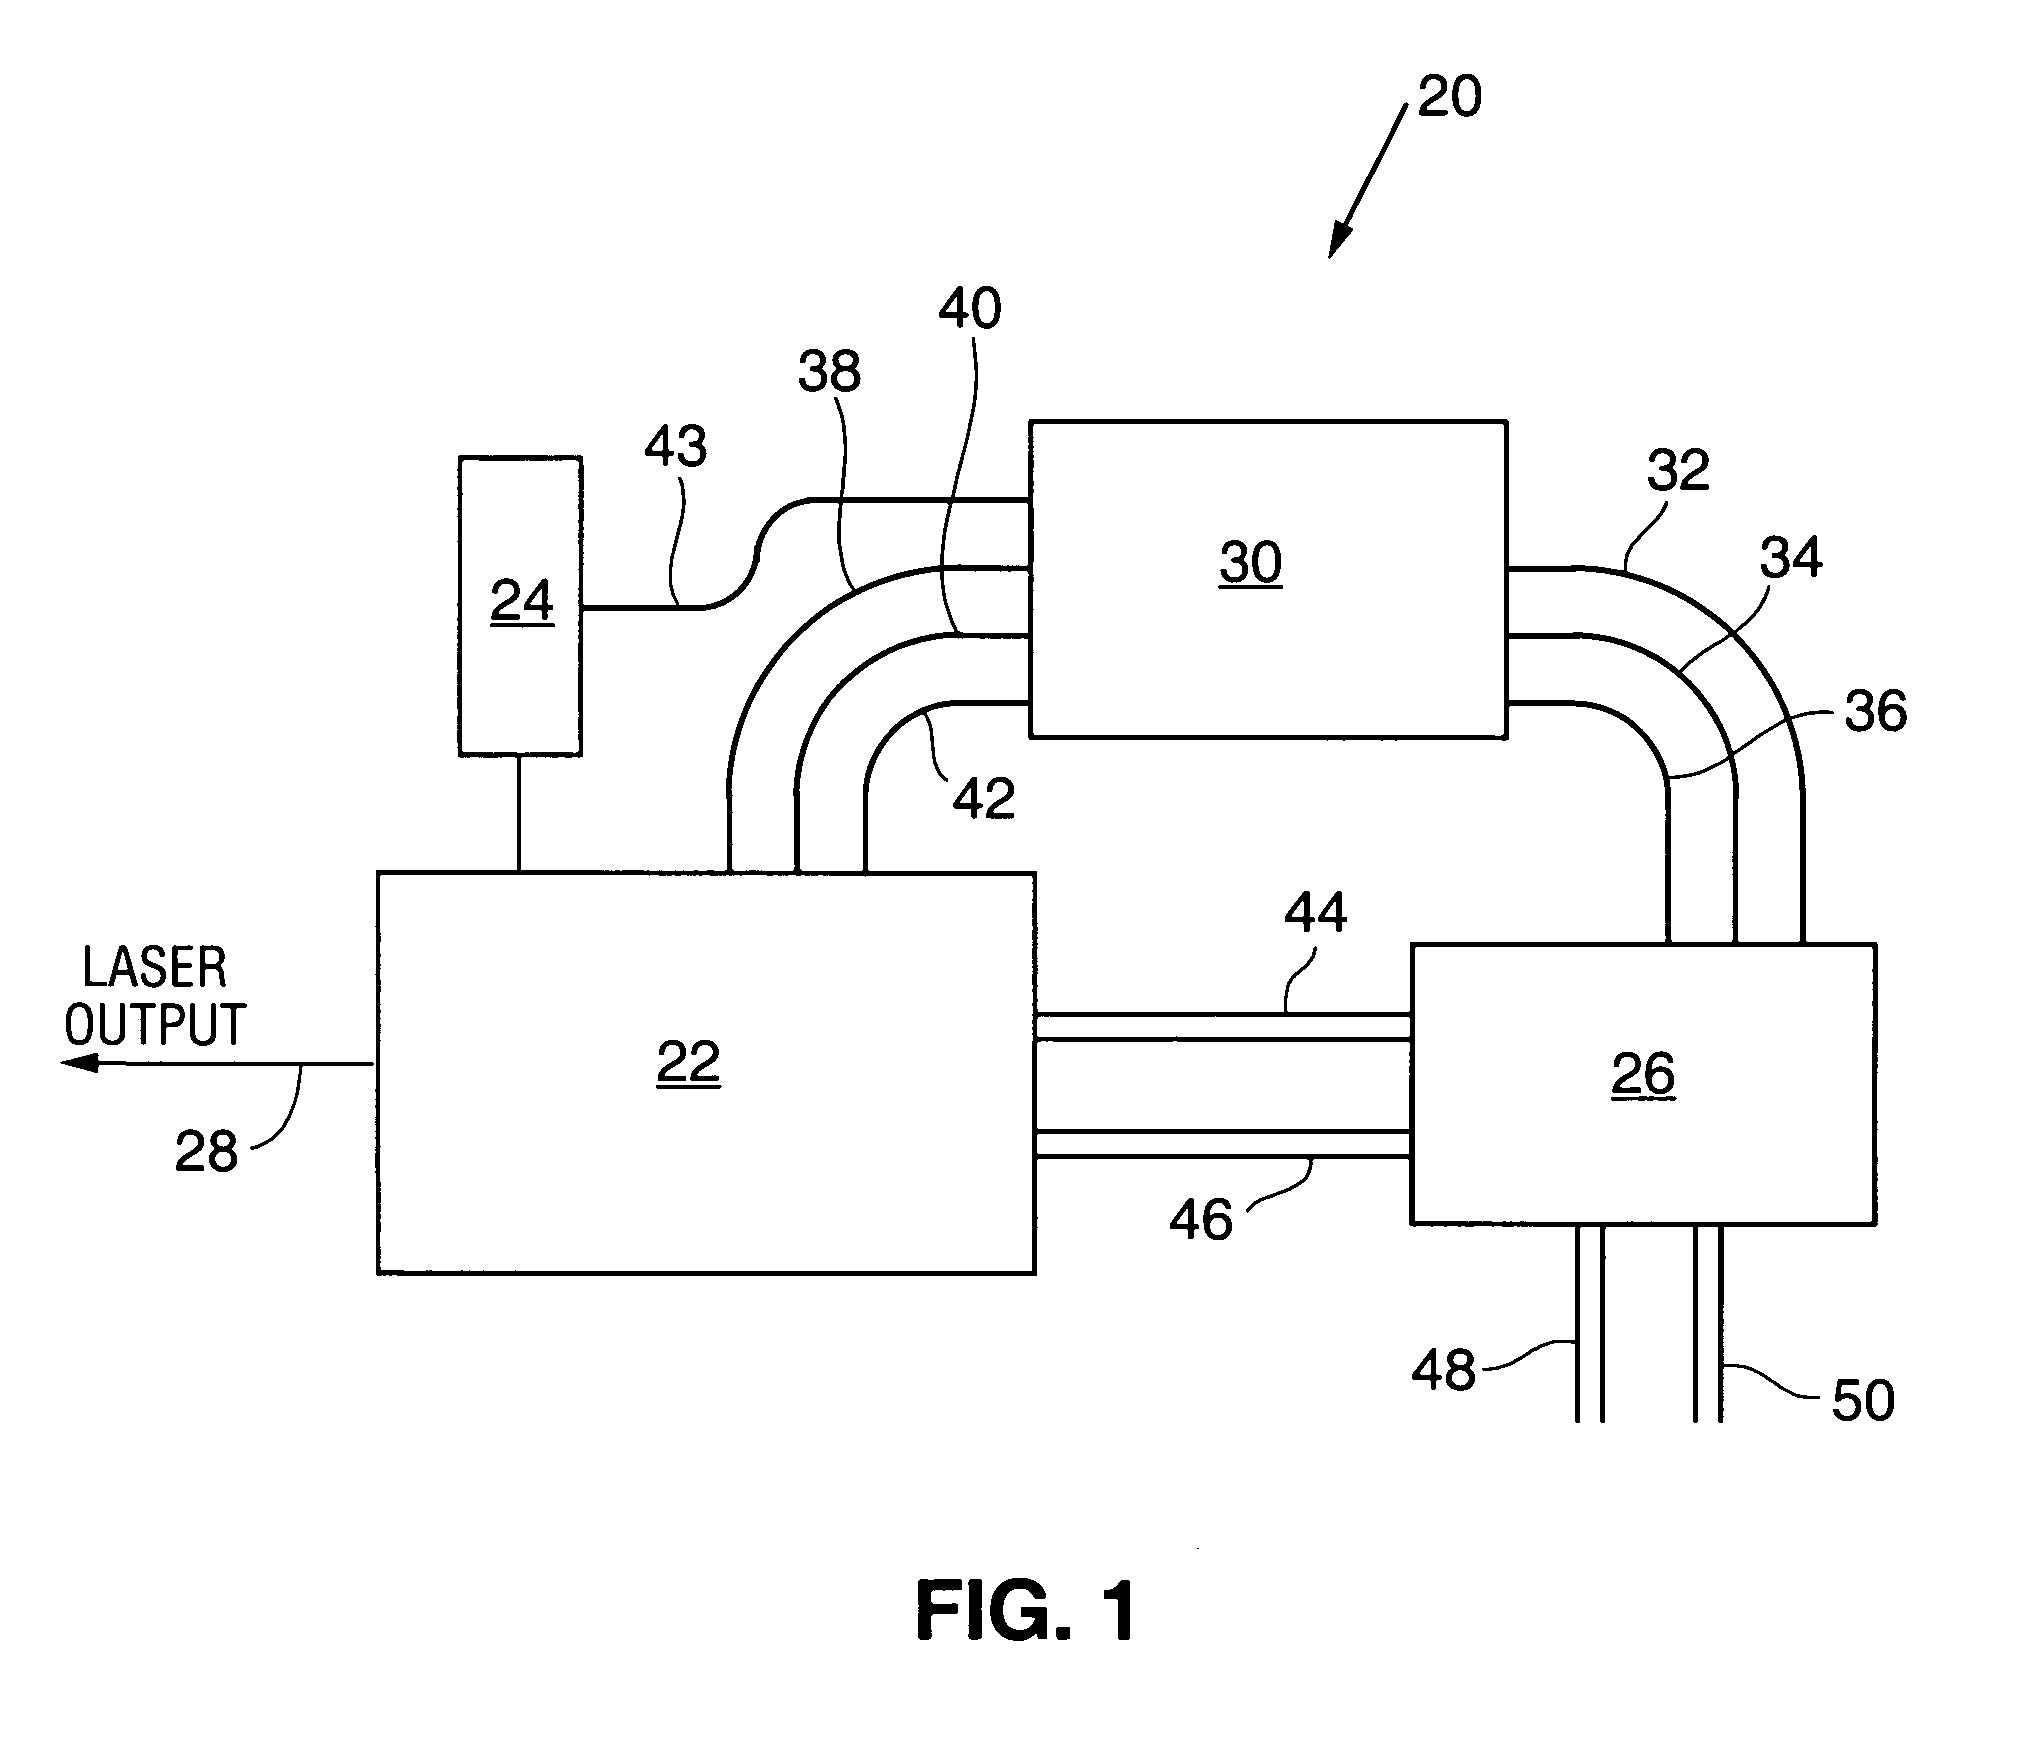 Closed-loop purging system for laser